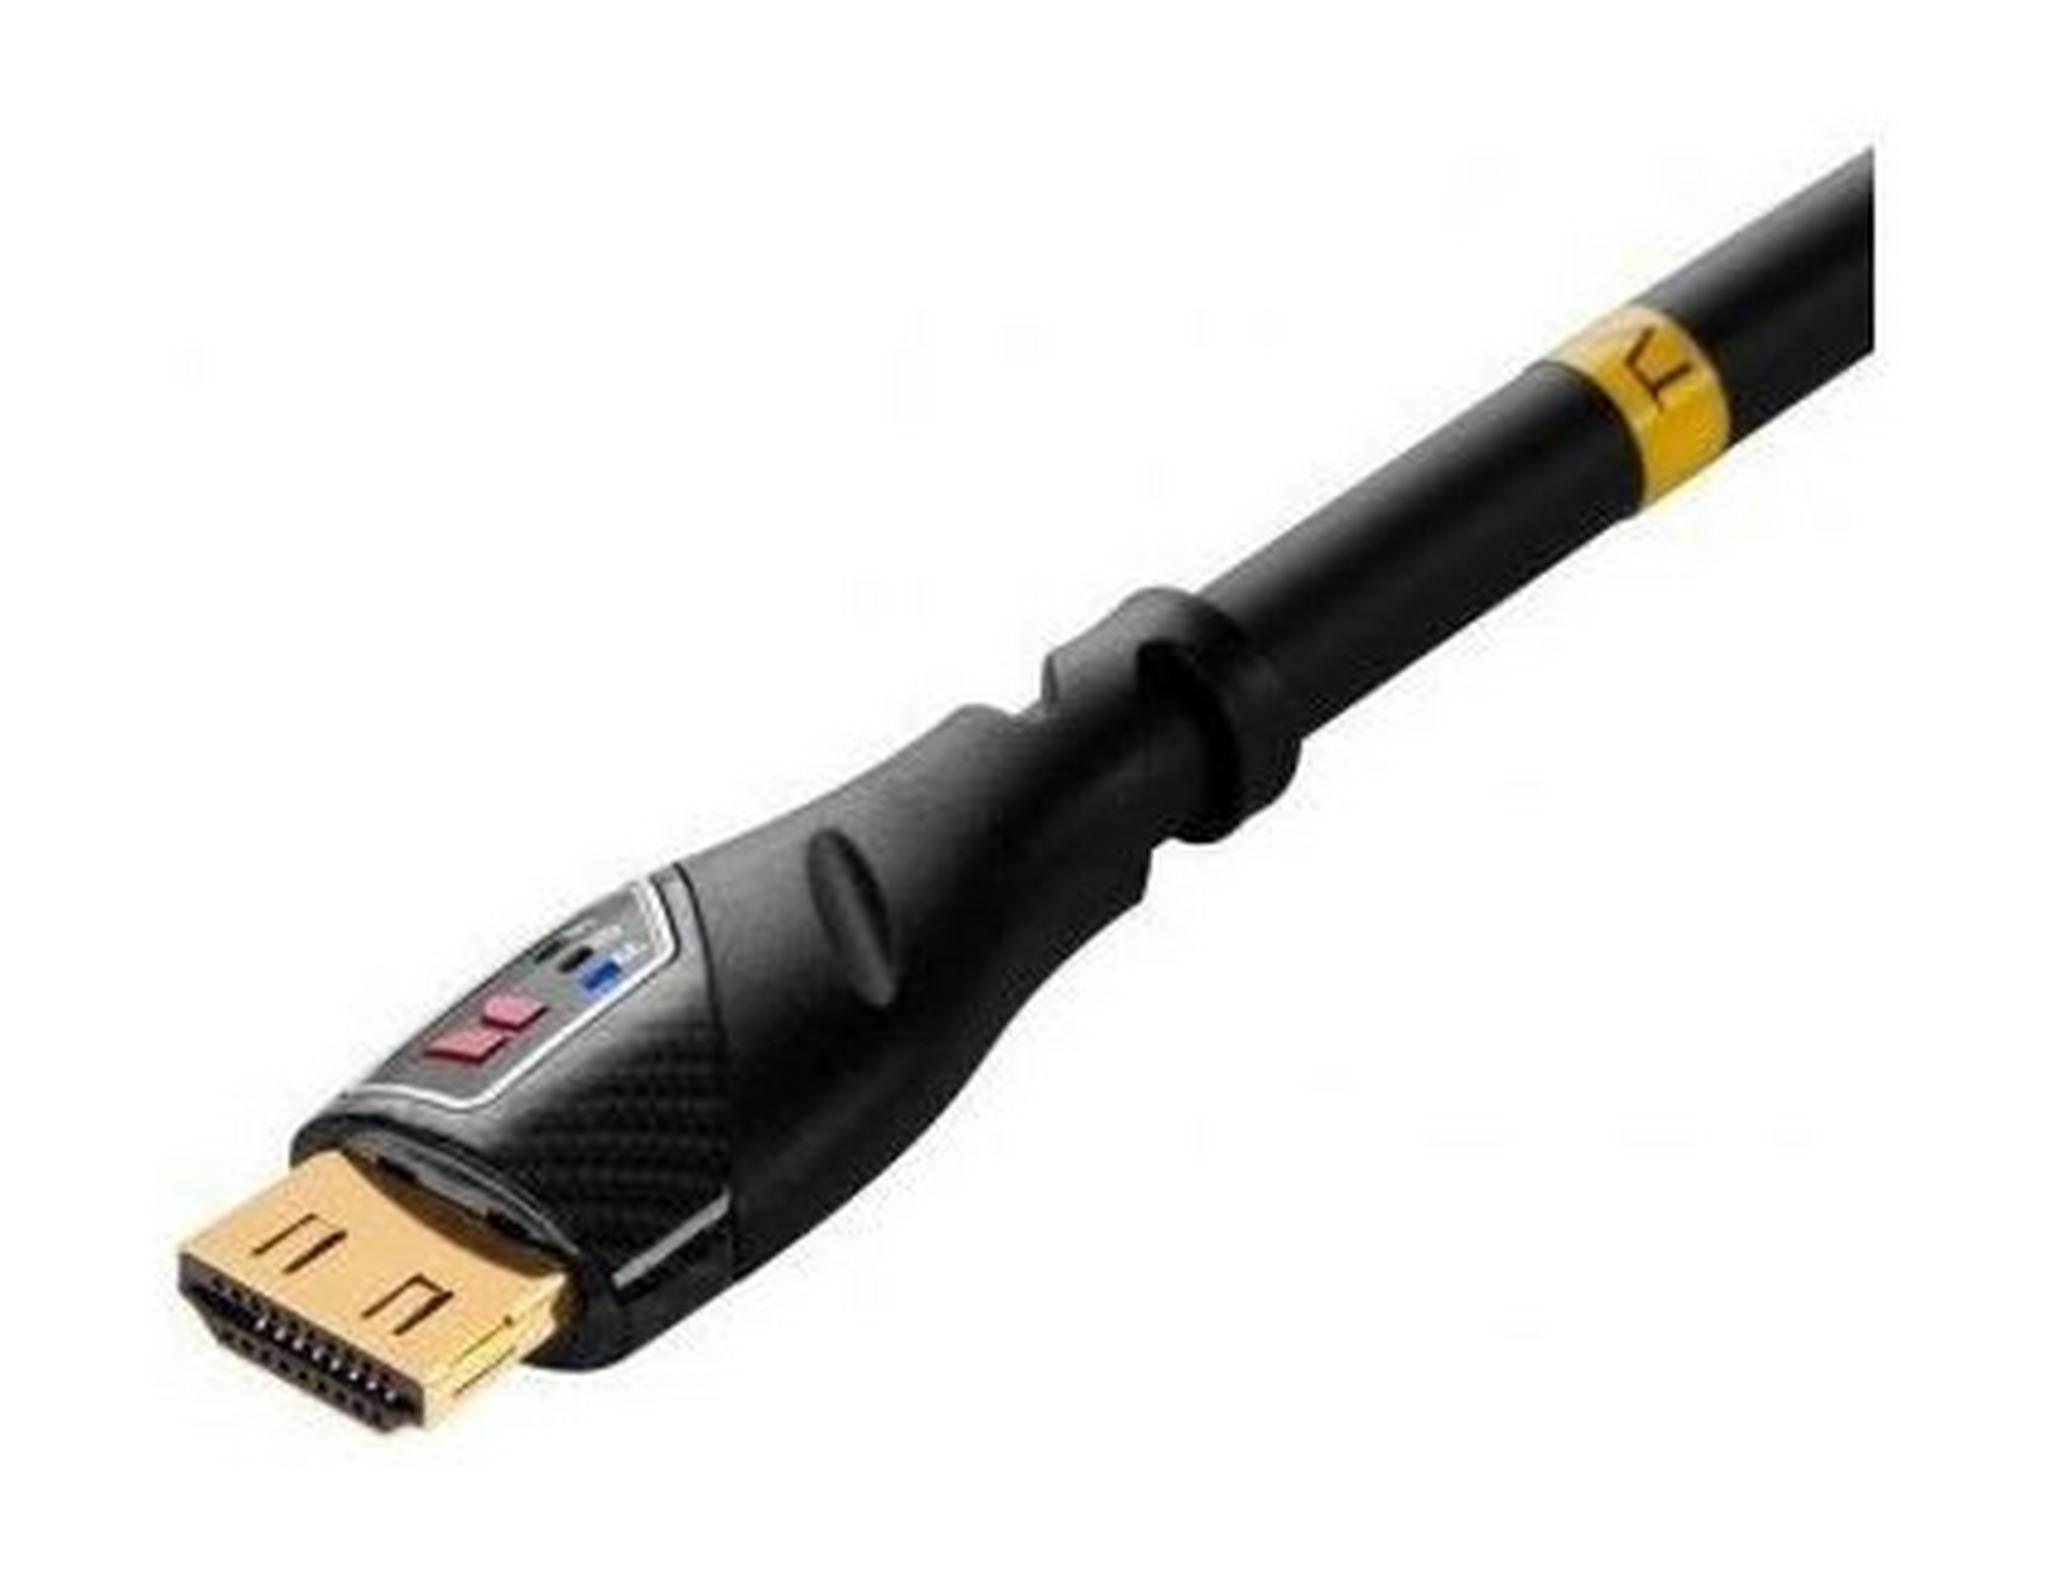 Monster Cable 10 Meters HDMI Cable - Black